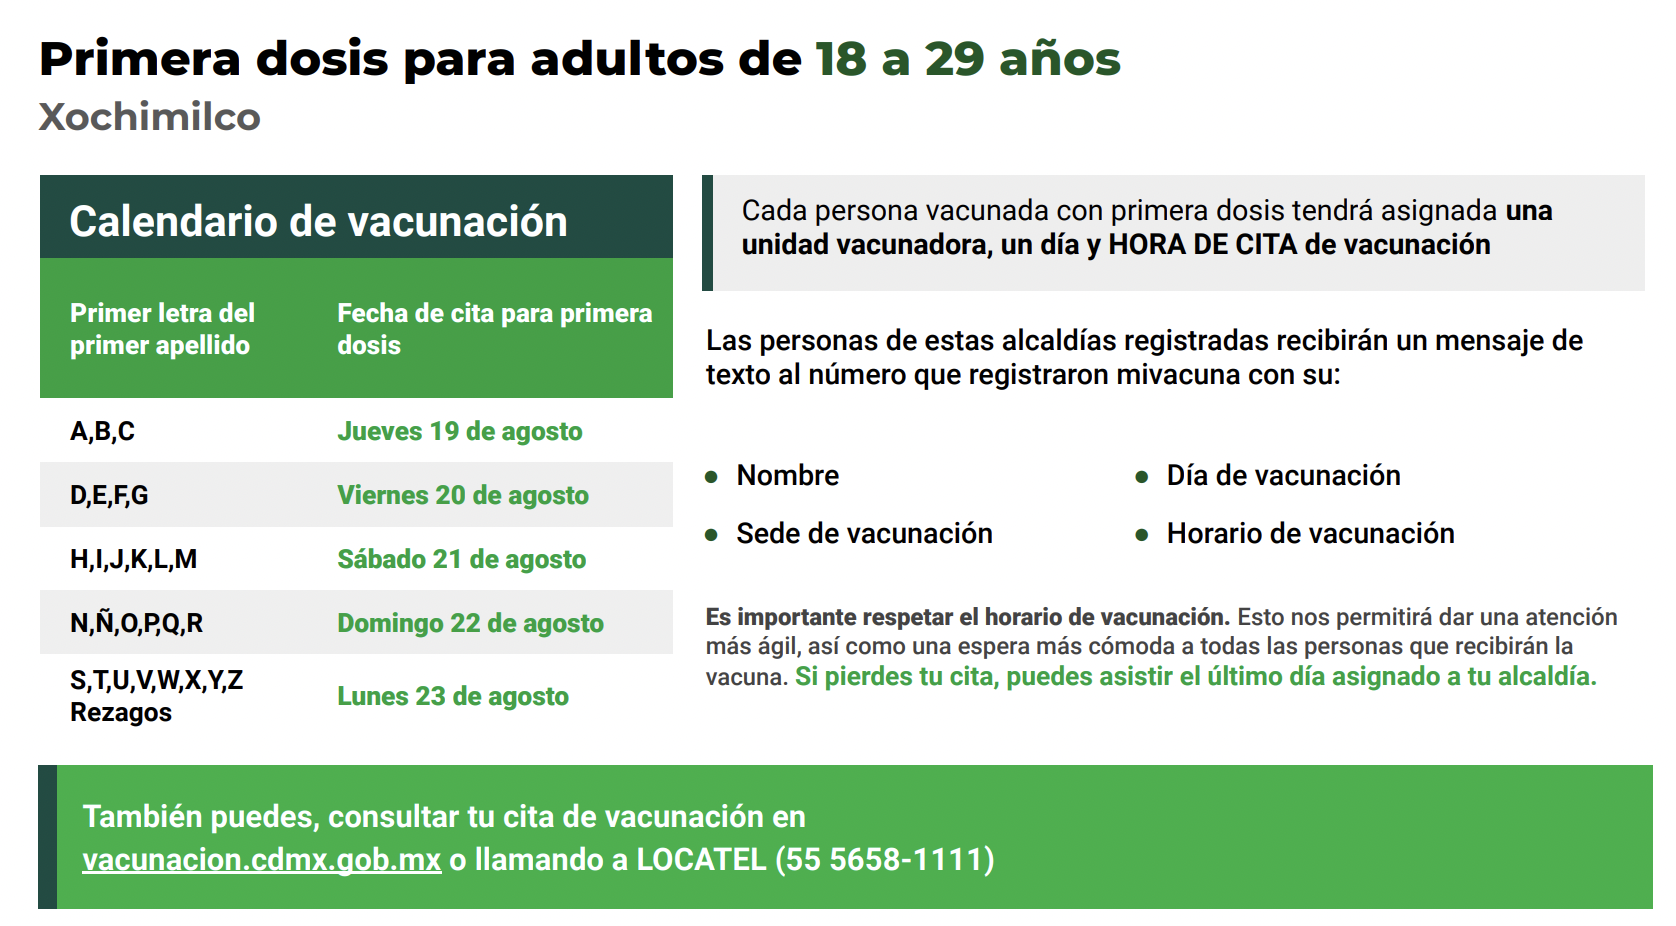 Next week begins vaccination for those between 18 and 29 years old in Xochimilco • News • Forbes México